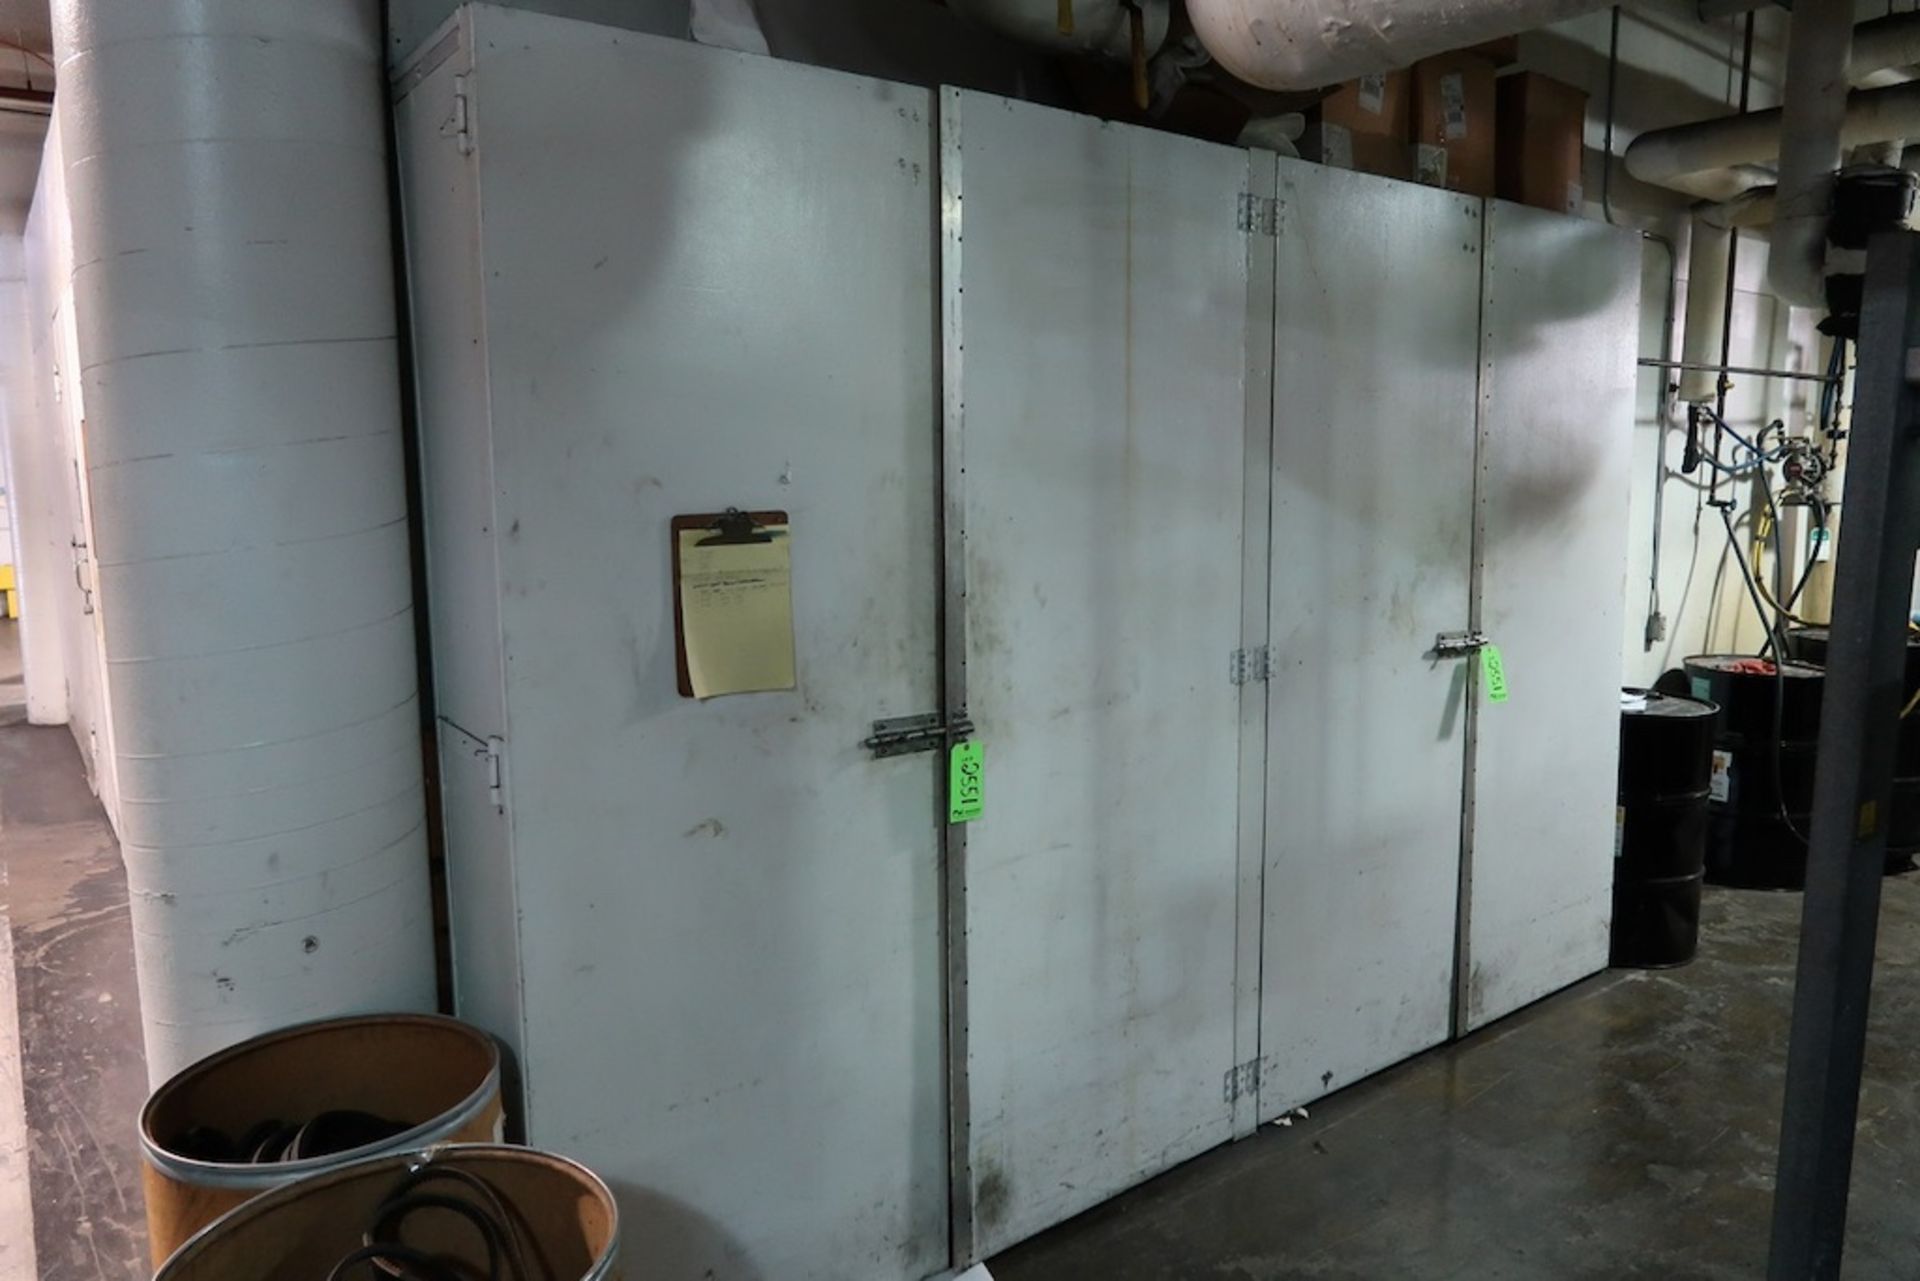 Remaining Contents of Compressor Room, to Include Desks, Cabinets, Etc. - Image 14 of 21